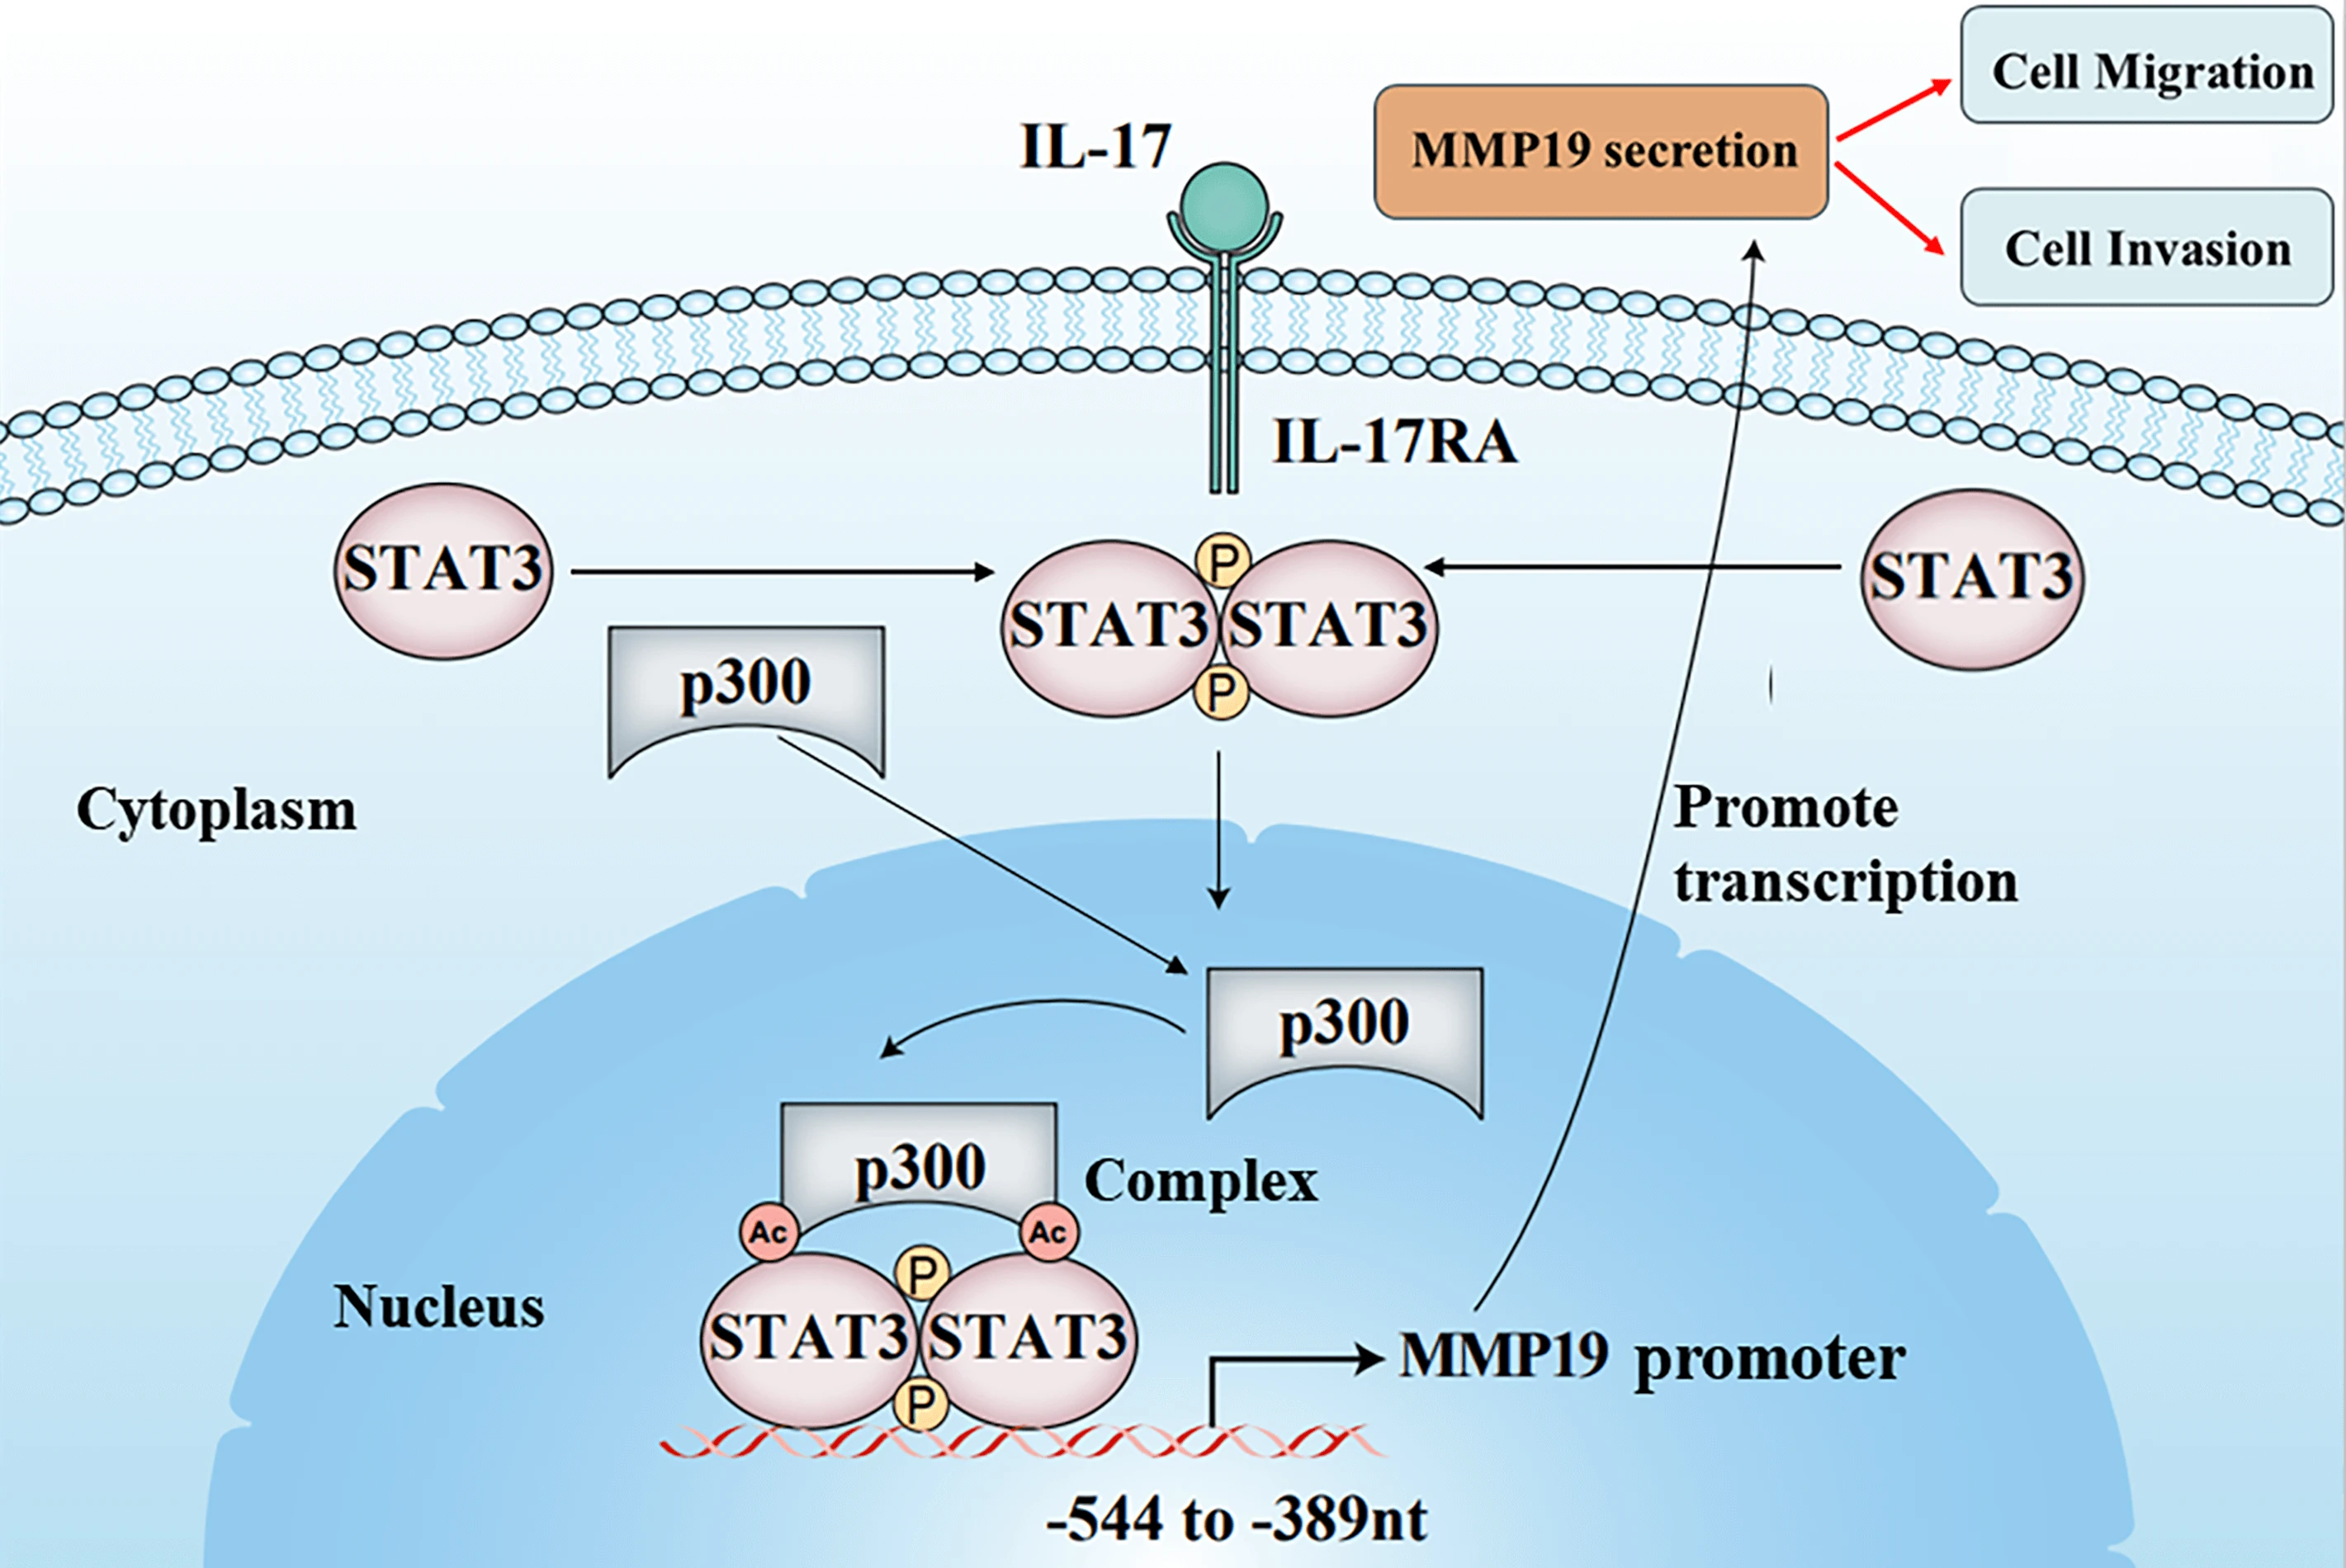 IL-17 induces NSCLC cell migration and invasion by elevating MMP19 gene transcription and expression through the interaction of p300-dependent STAT3-K631 acetylation and its Y705-phosphorylation